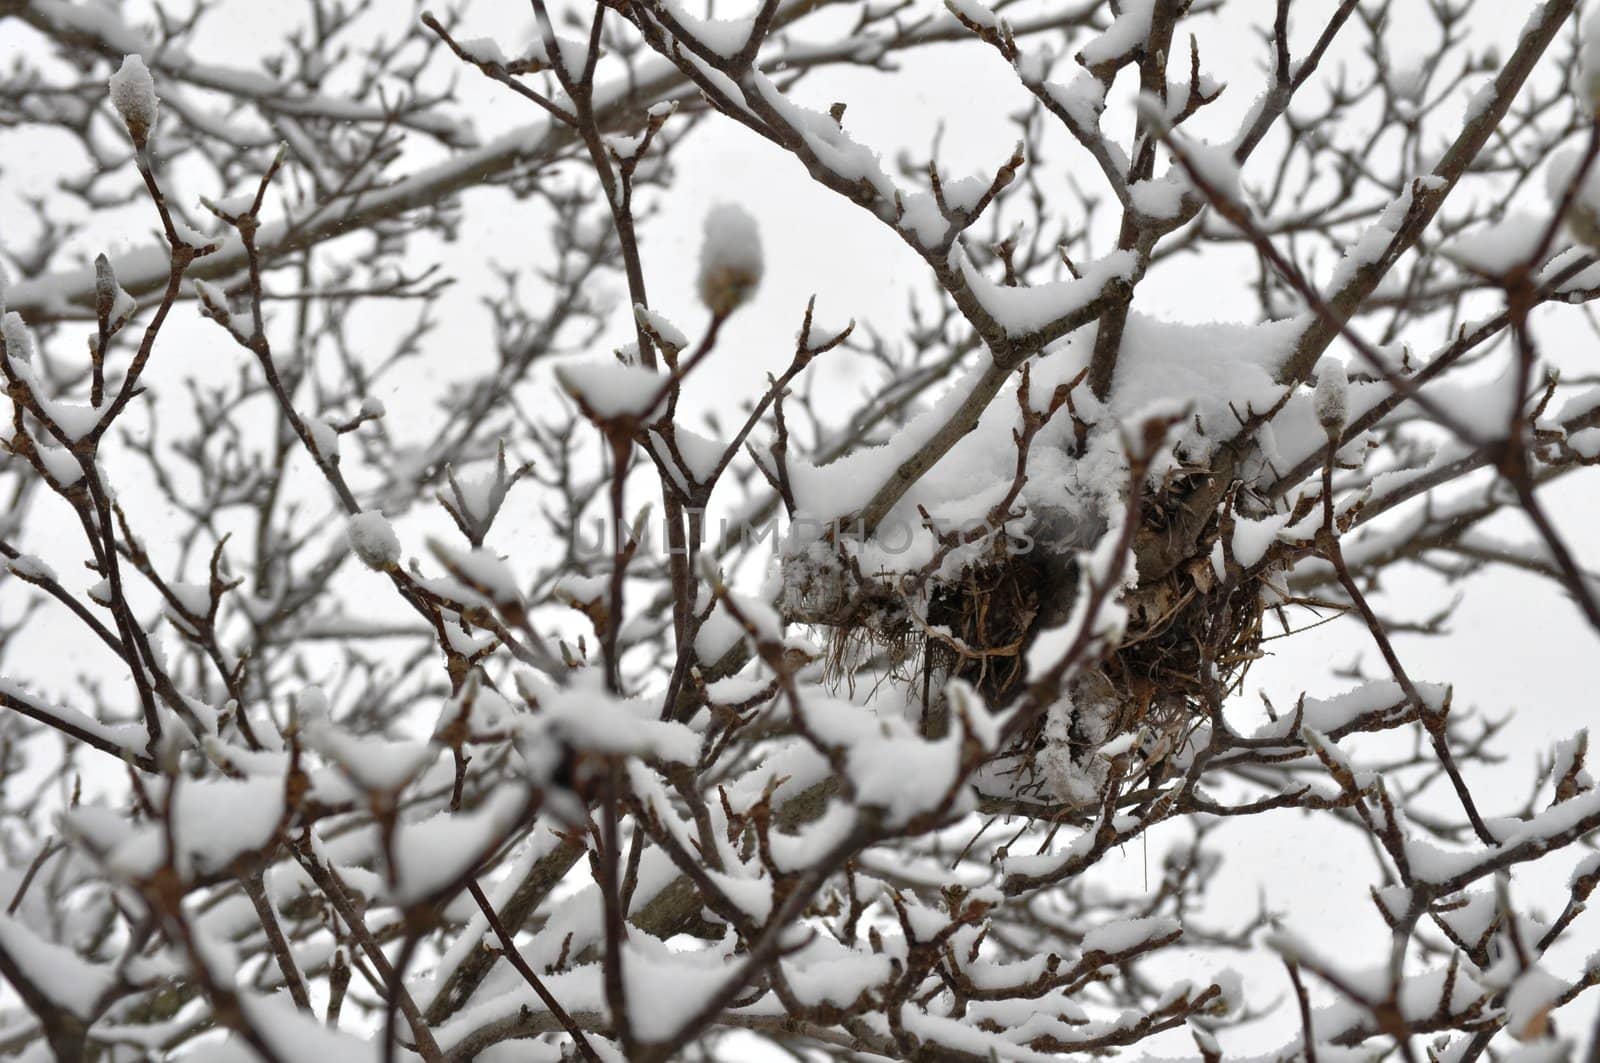 Snowstorm Trees and birds nest